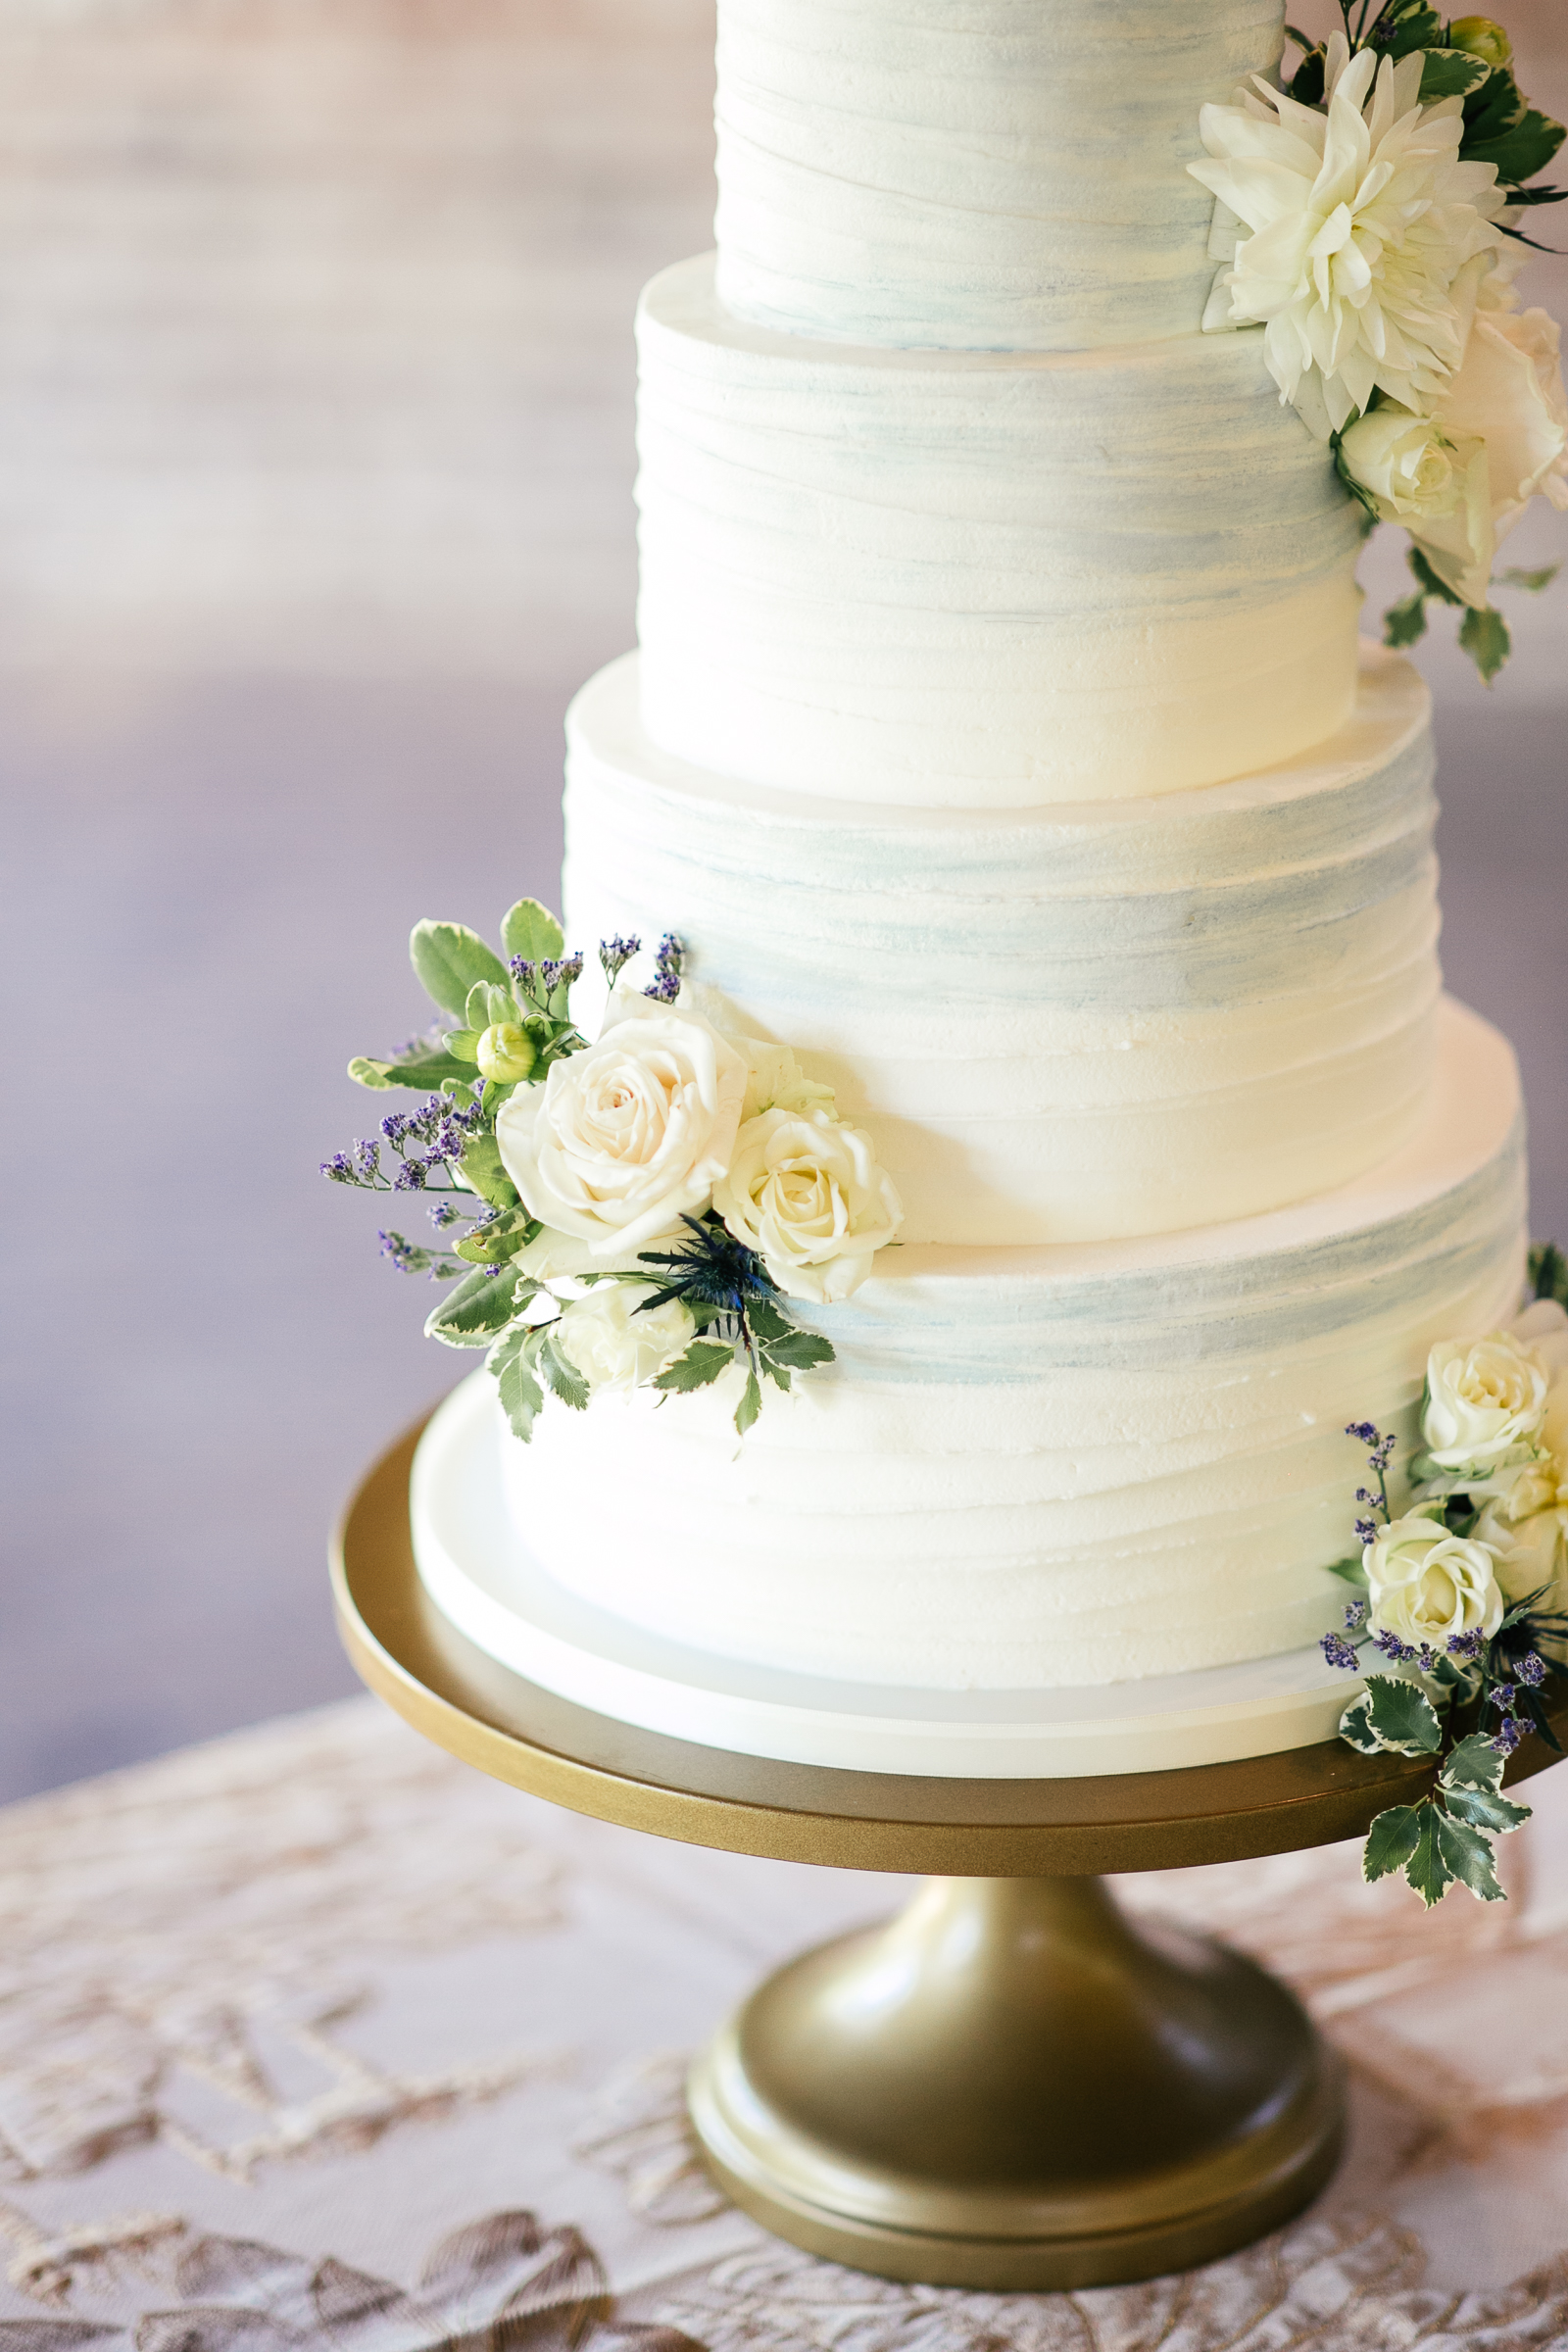 hand painted wedding cake with dusty blue watercolor accents and fresh flowers on gold cake stand